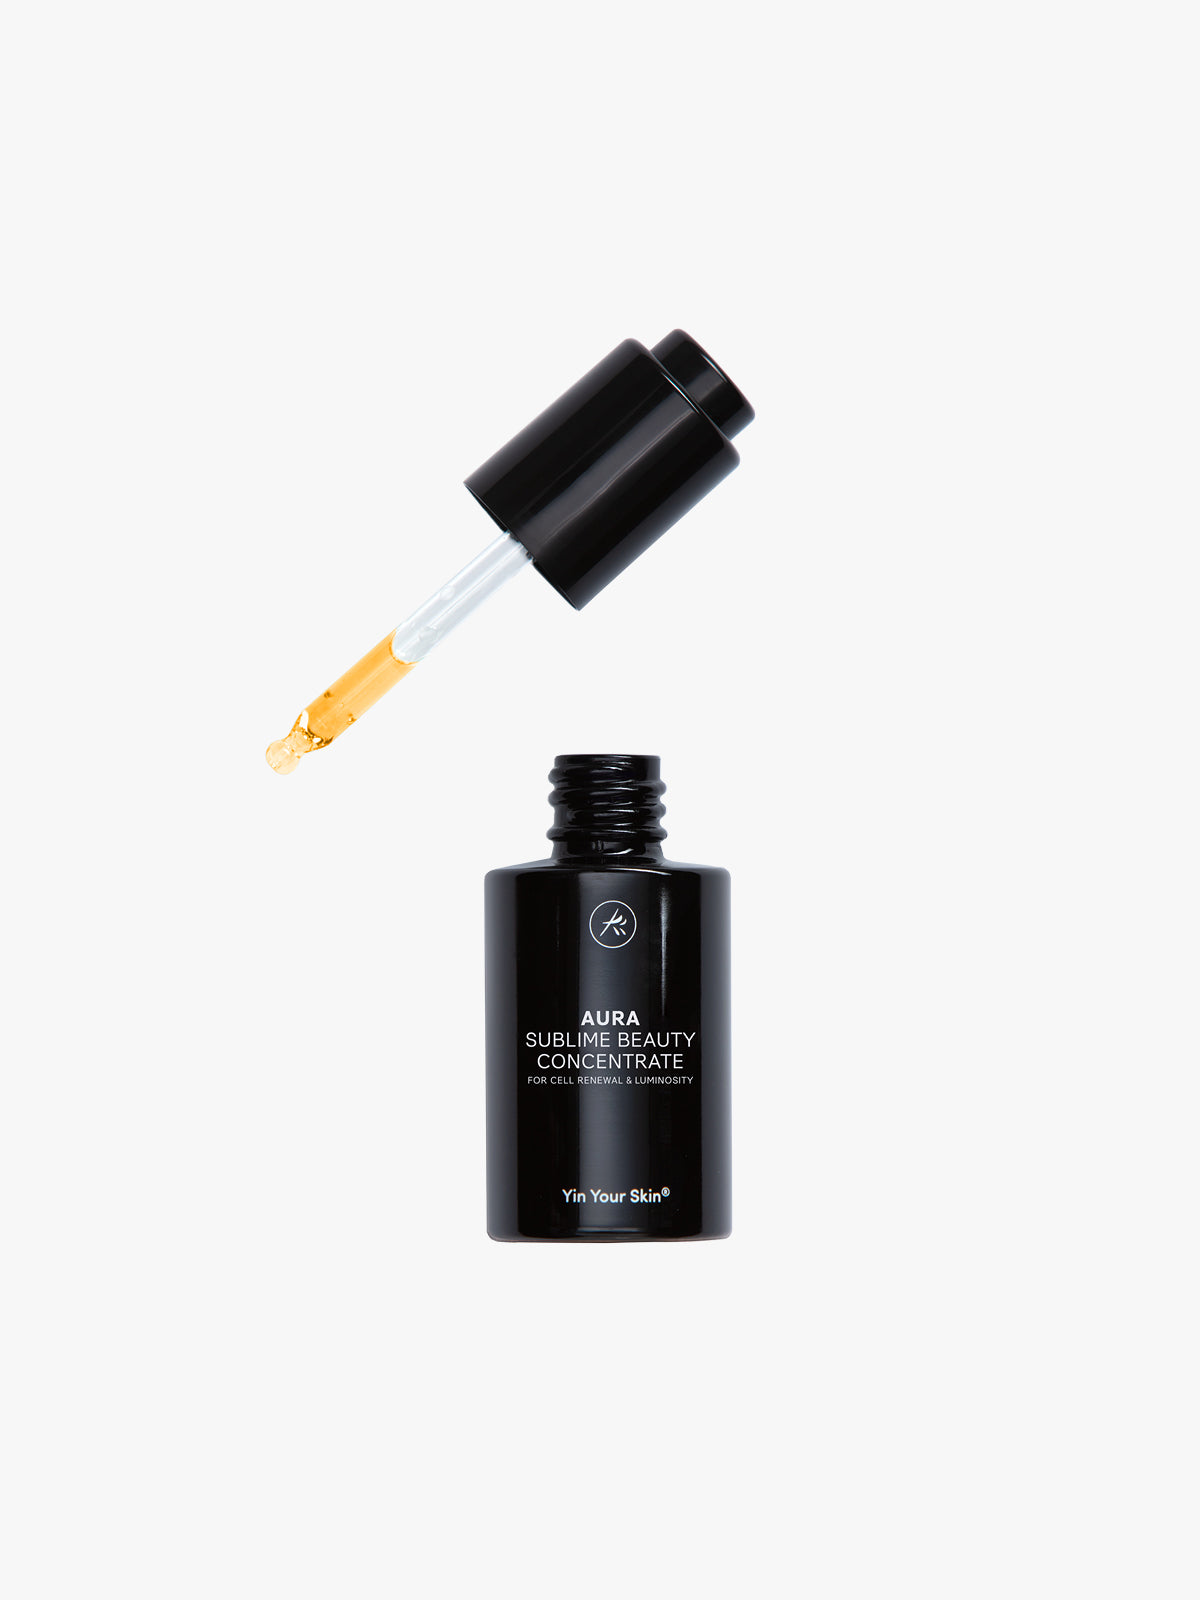 AURA Sublime Beauty Concentrate for Cell Renewal and Luminosity